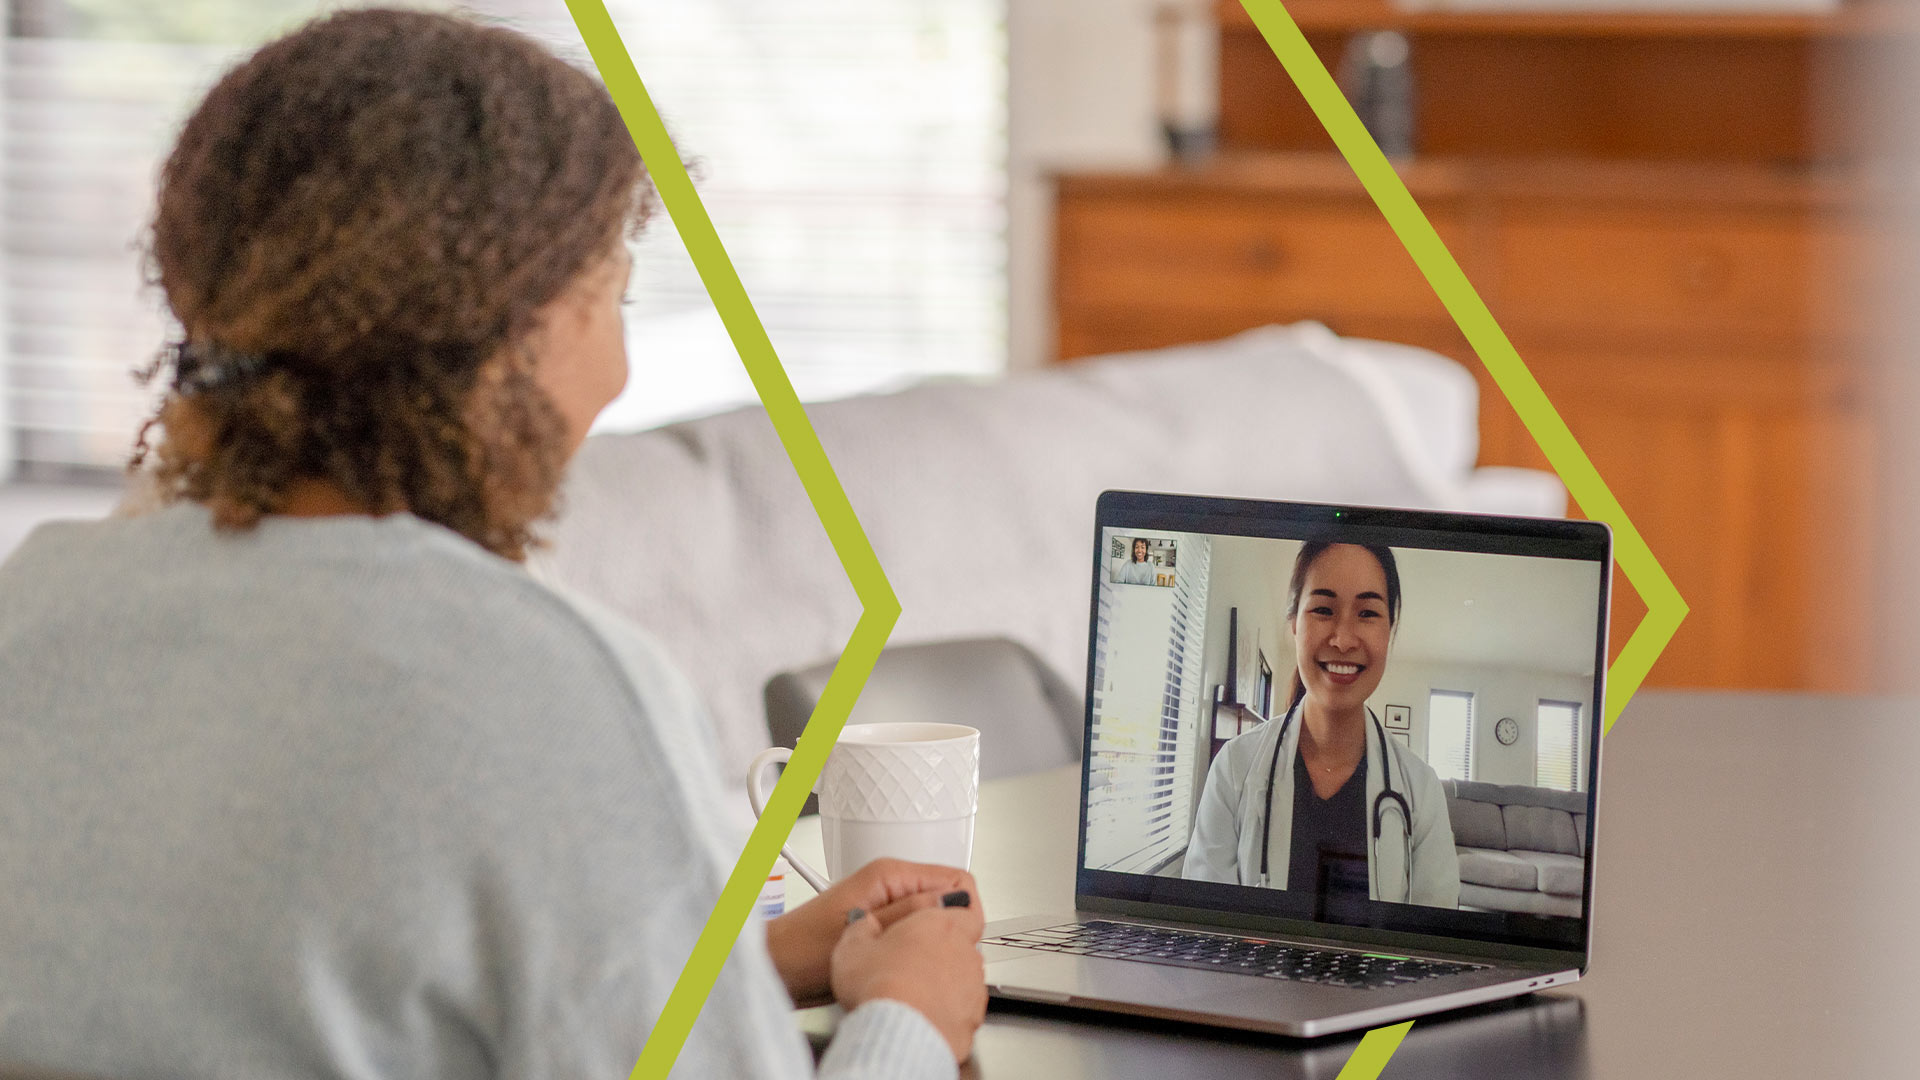 Physician leading a virtual health appointment with patient through a laptop.